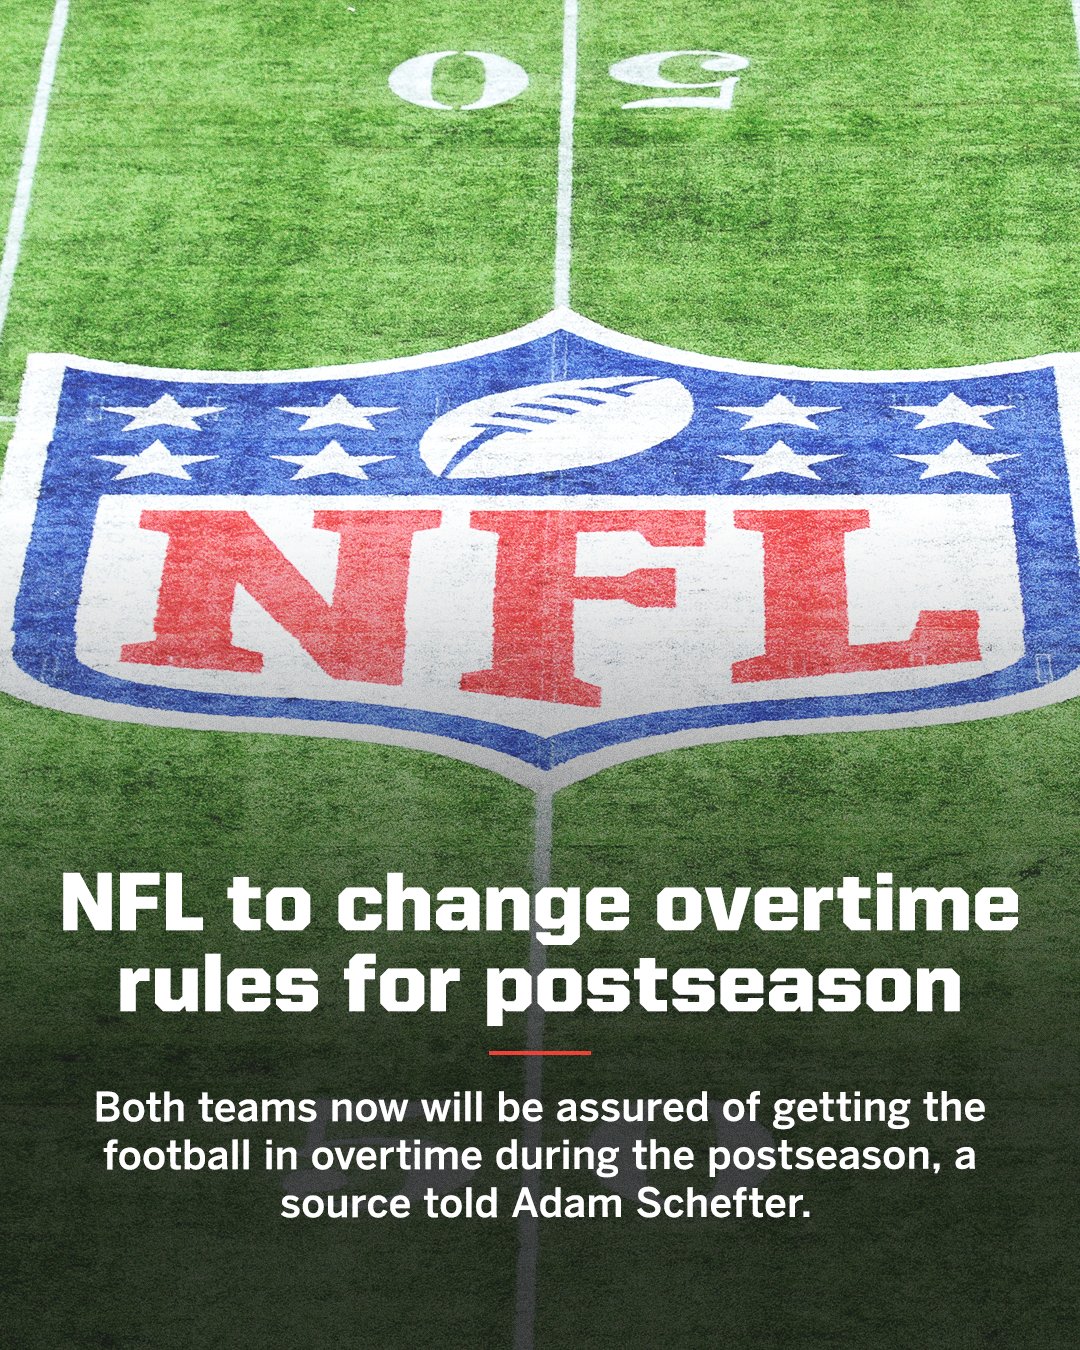 ESPN on Twitter: 'In the postseason, both teams now will be